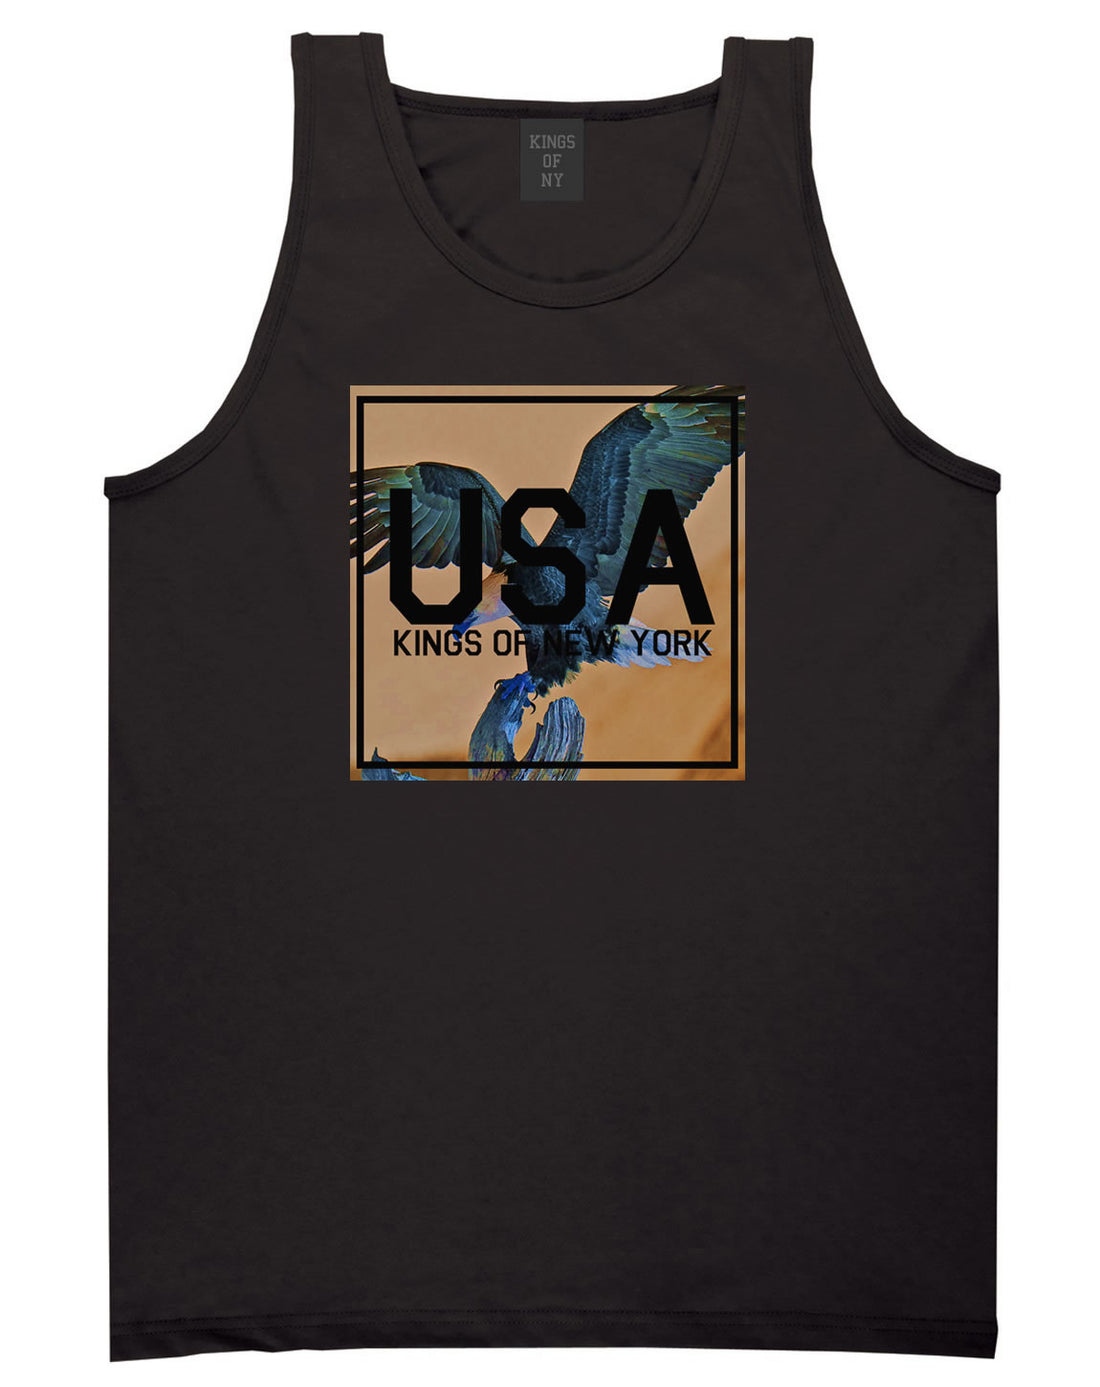 USA Bald Eagle America Tank Top in Black By Kings Of NY